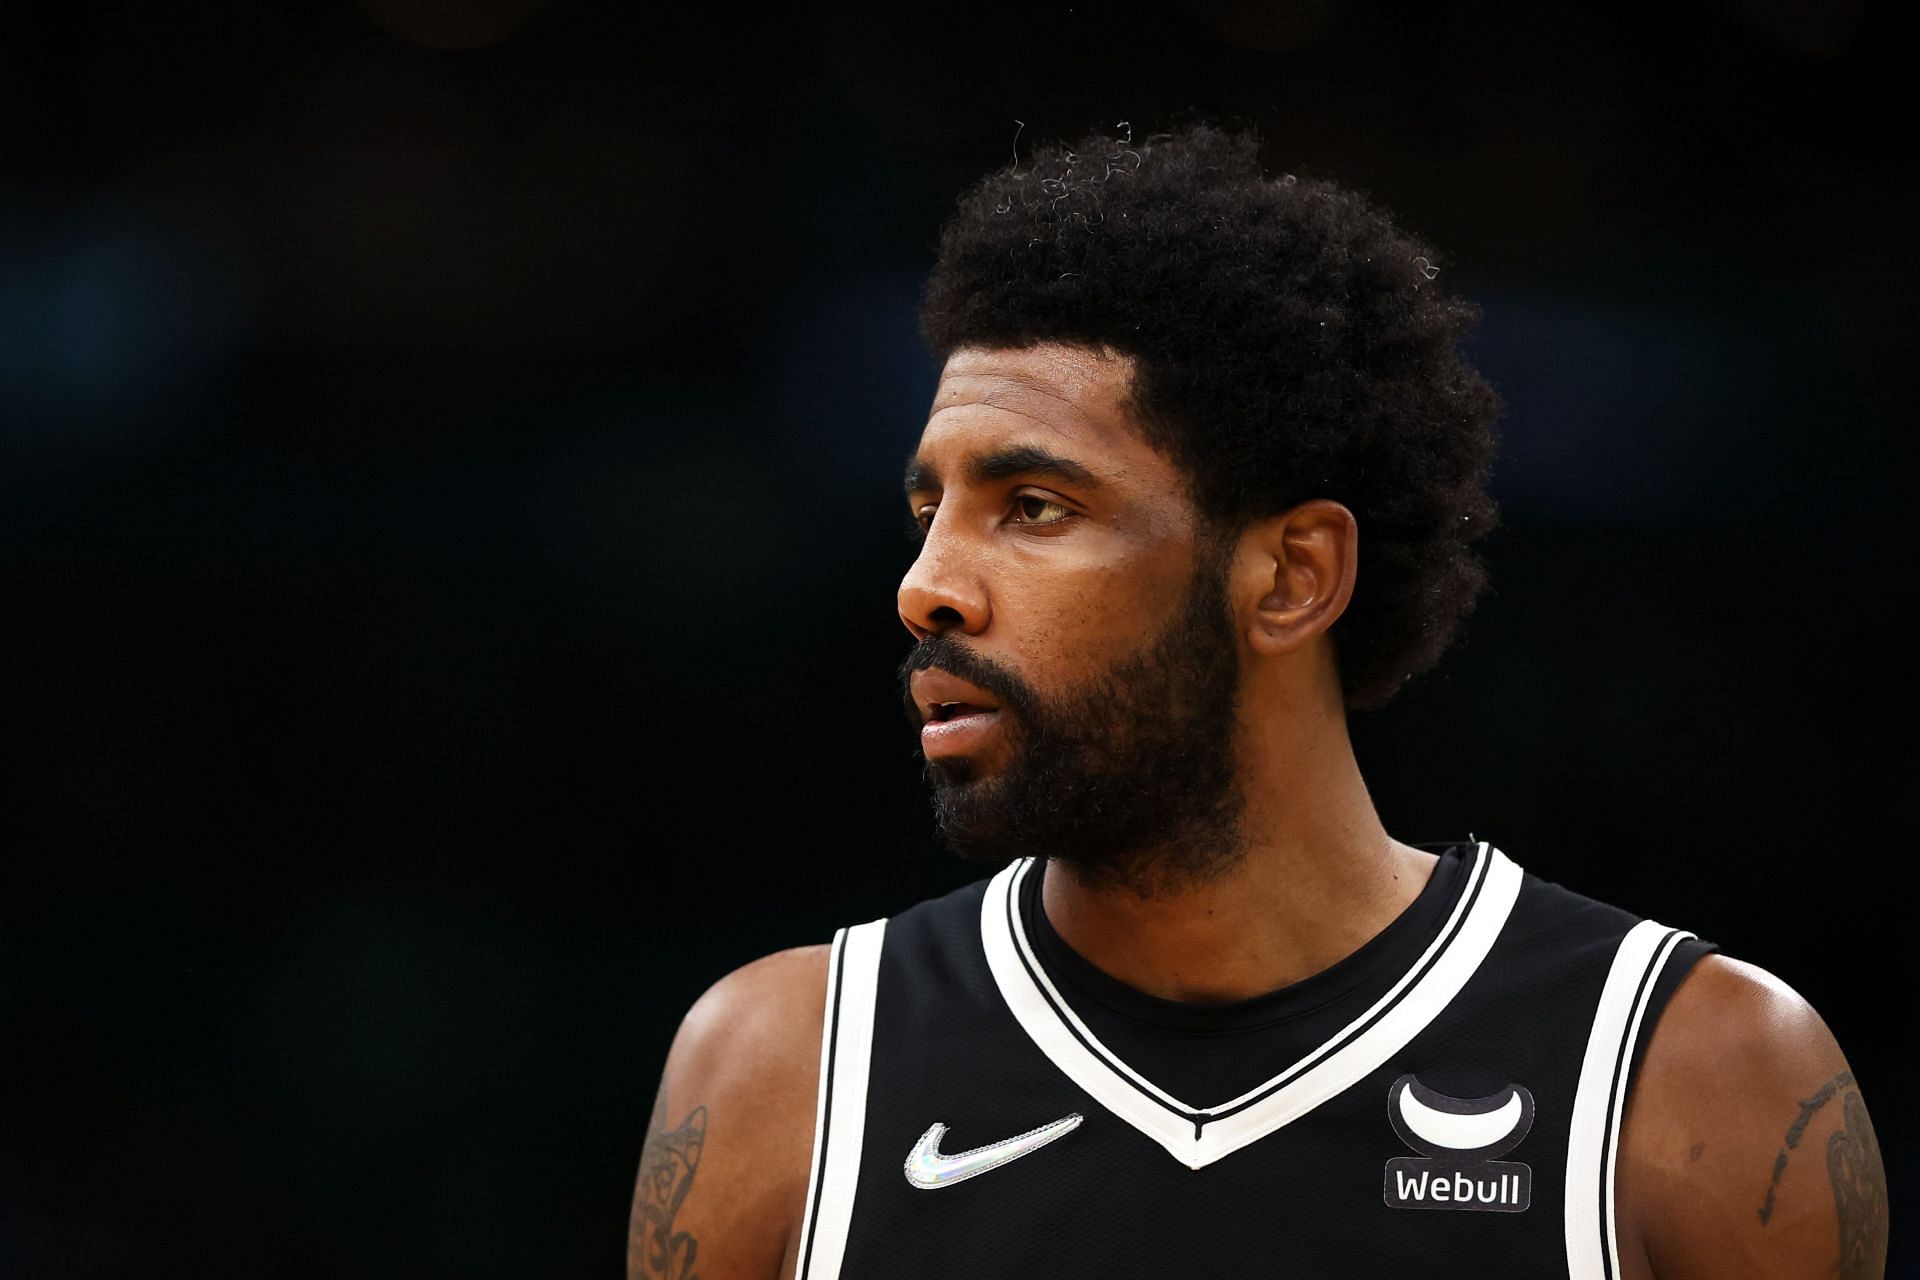 The LA Lakers could relent and attach two future first-round picks to acquire Kyrie Irving from the Brooklyn Nets.